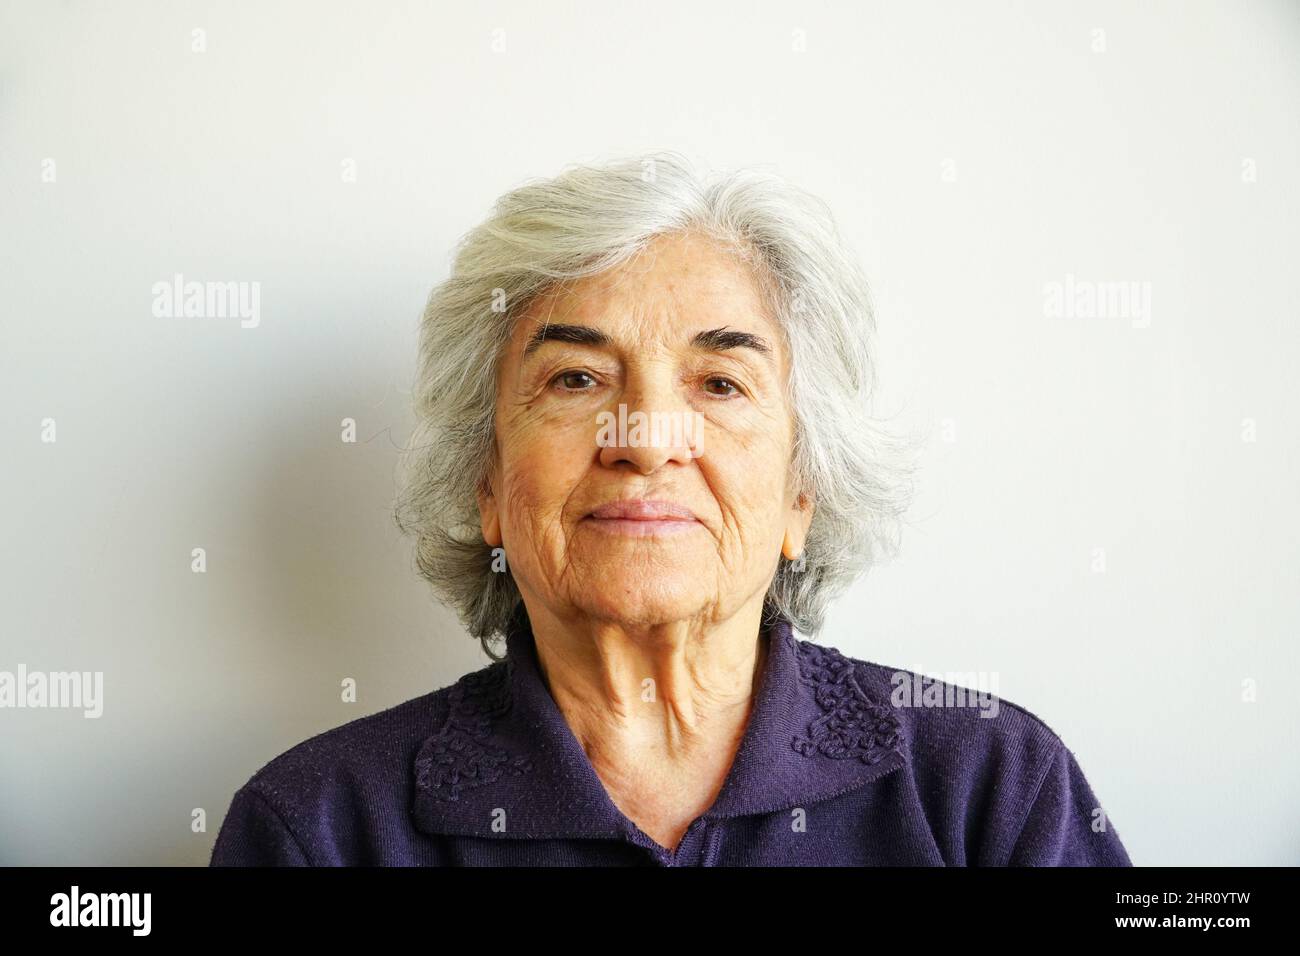 Portrait of old smiling woman in seventies. Old woman with green eyes looking at camera. Elderly person smiling peaceful. Senior woman portrait. Stock Photo